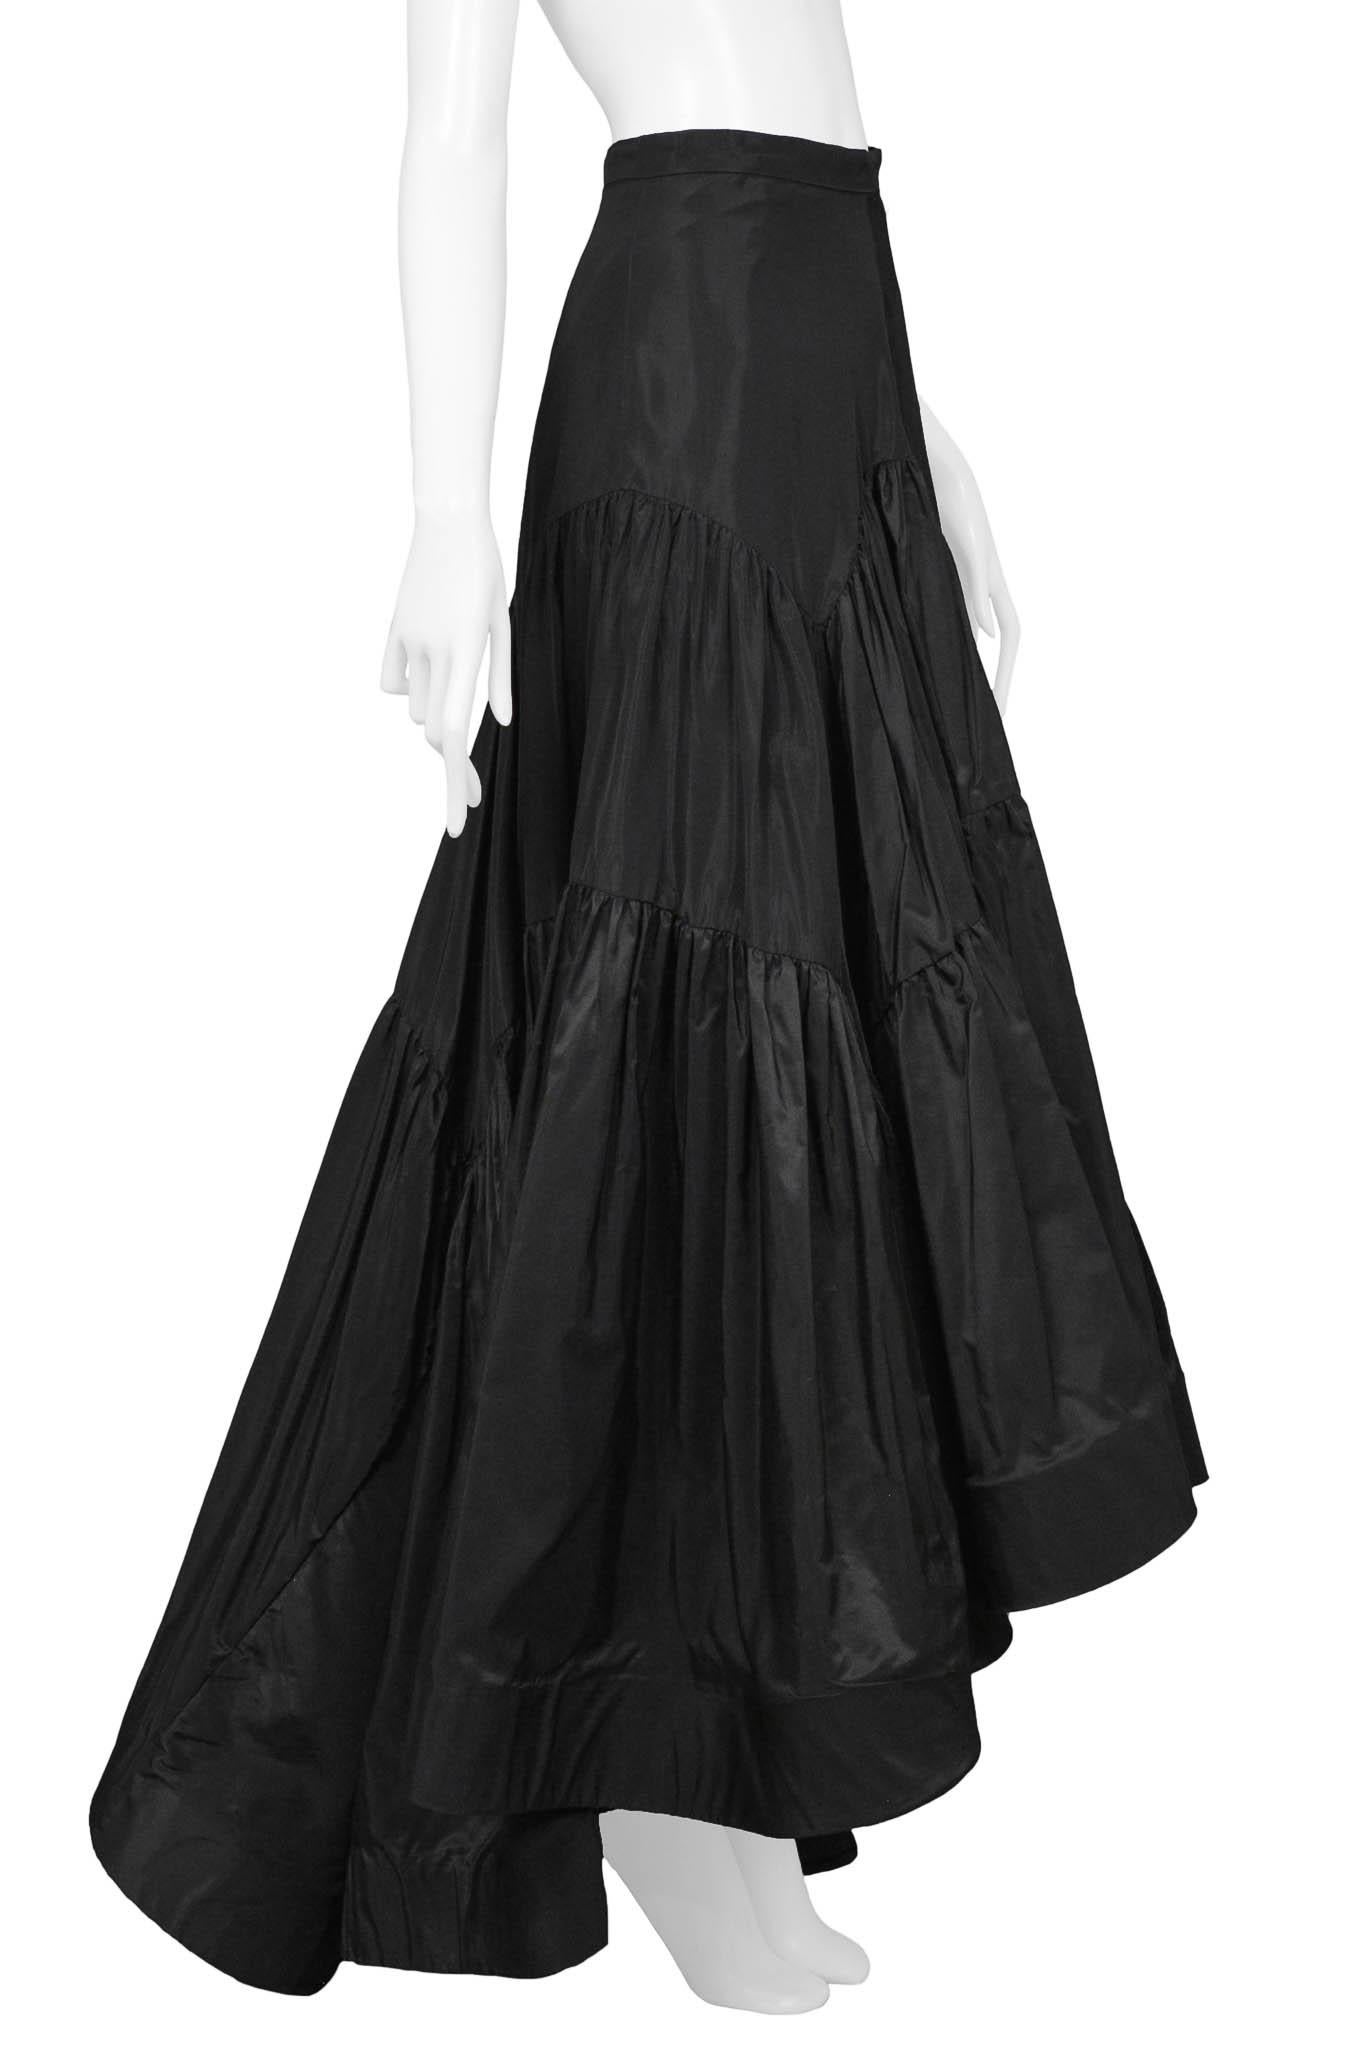 Katy Rodriguez Black Ball Gown Skirt For Sale 1